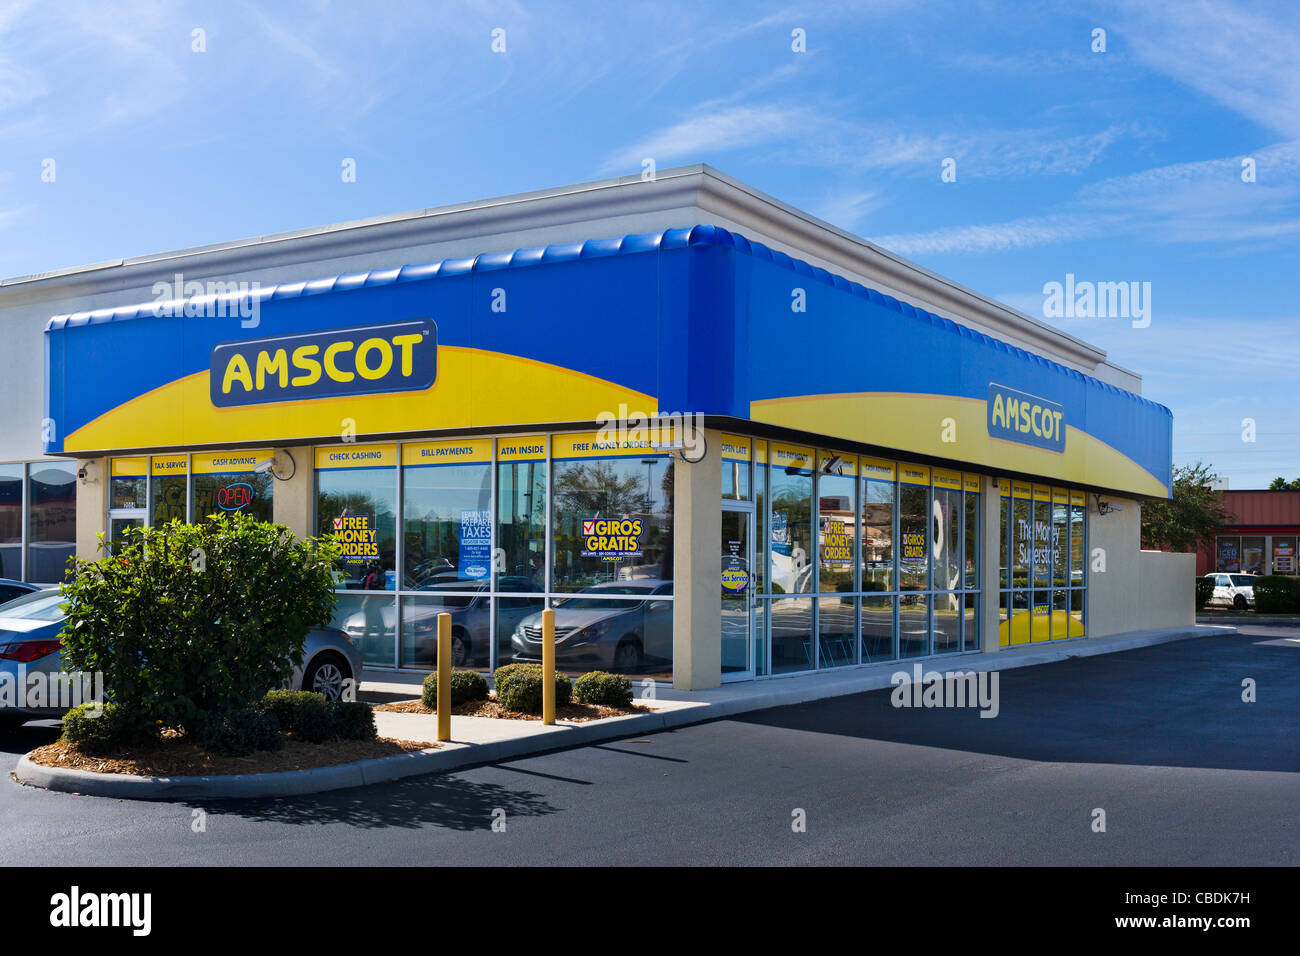 An Amscot money superstore, Lake Wales, Central Florida, USA Stock Photo